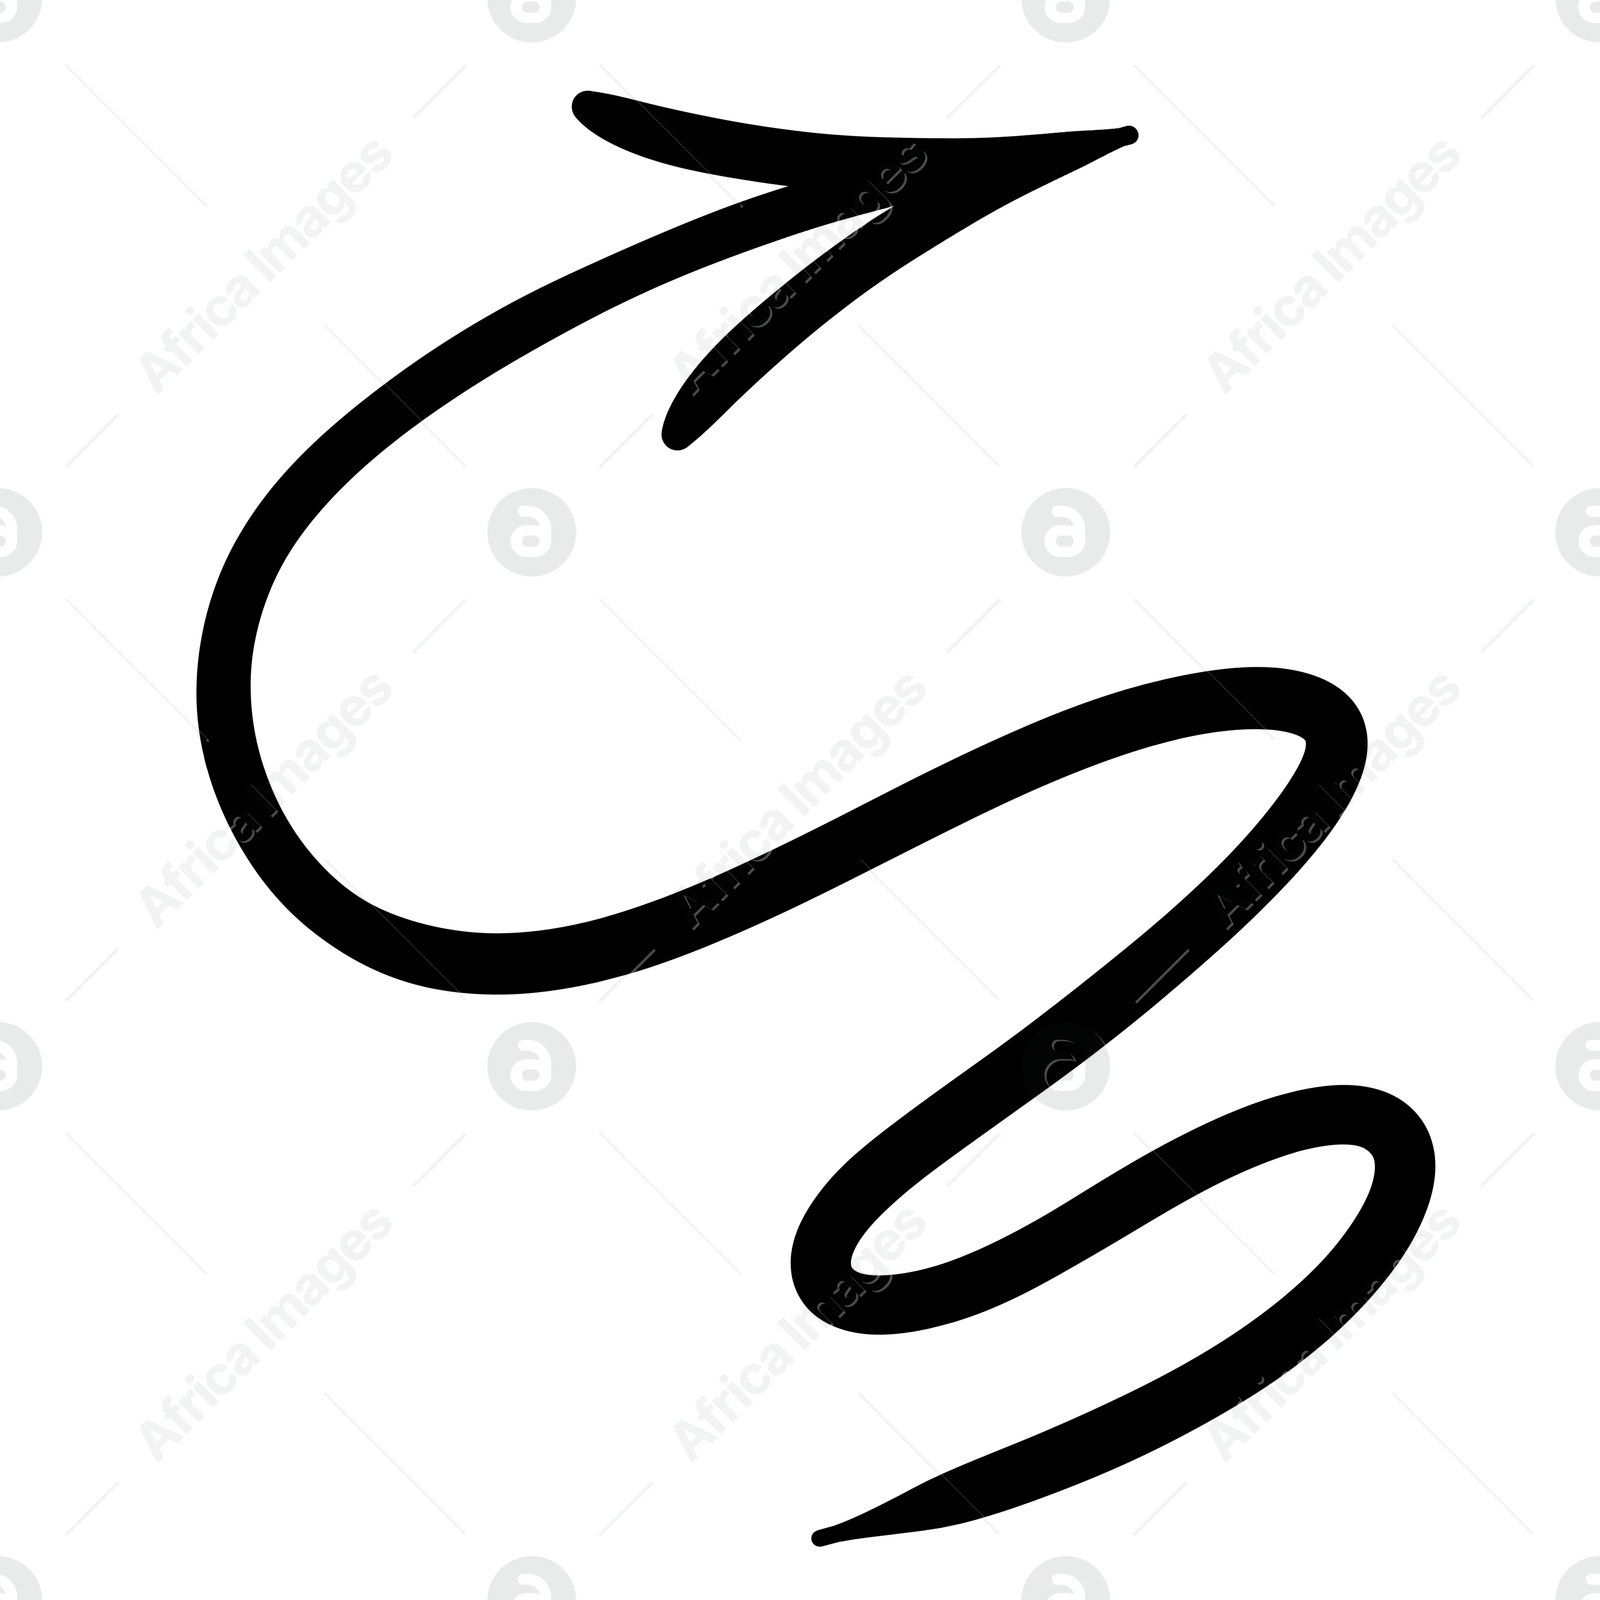 Image of One black drawn arrow isolated on white